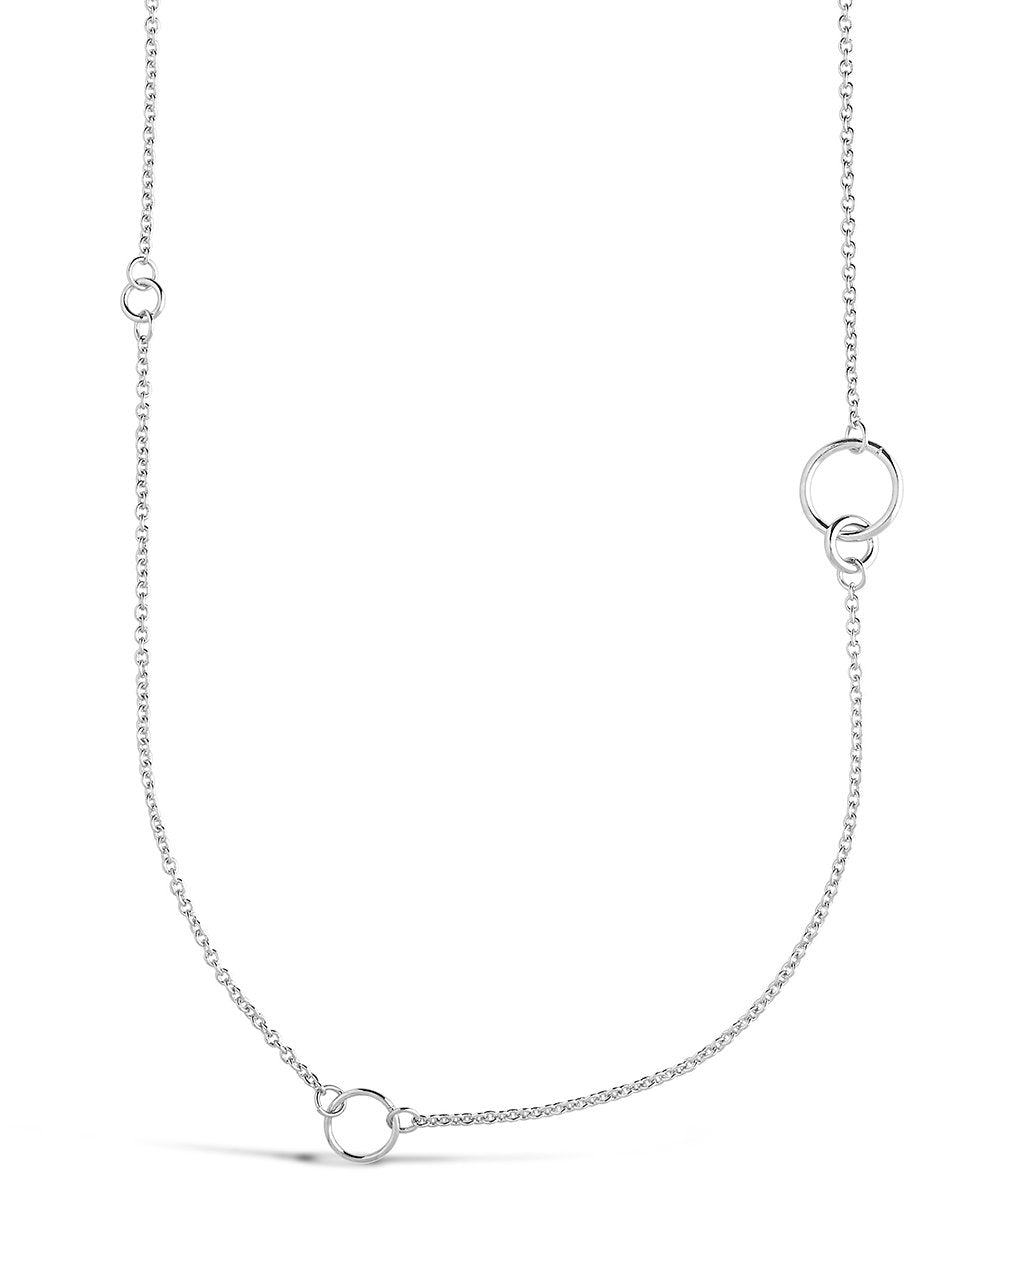 Long Polished Interlocking Circles Necklace - Sterling Forever